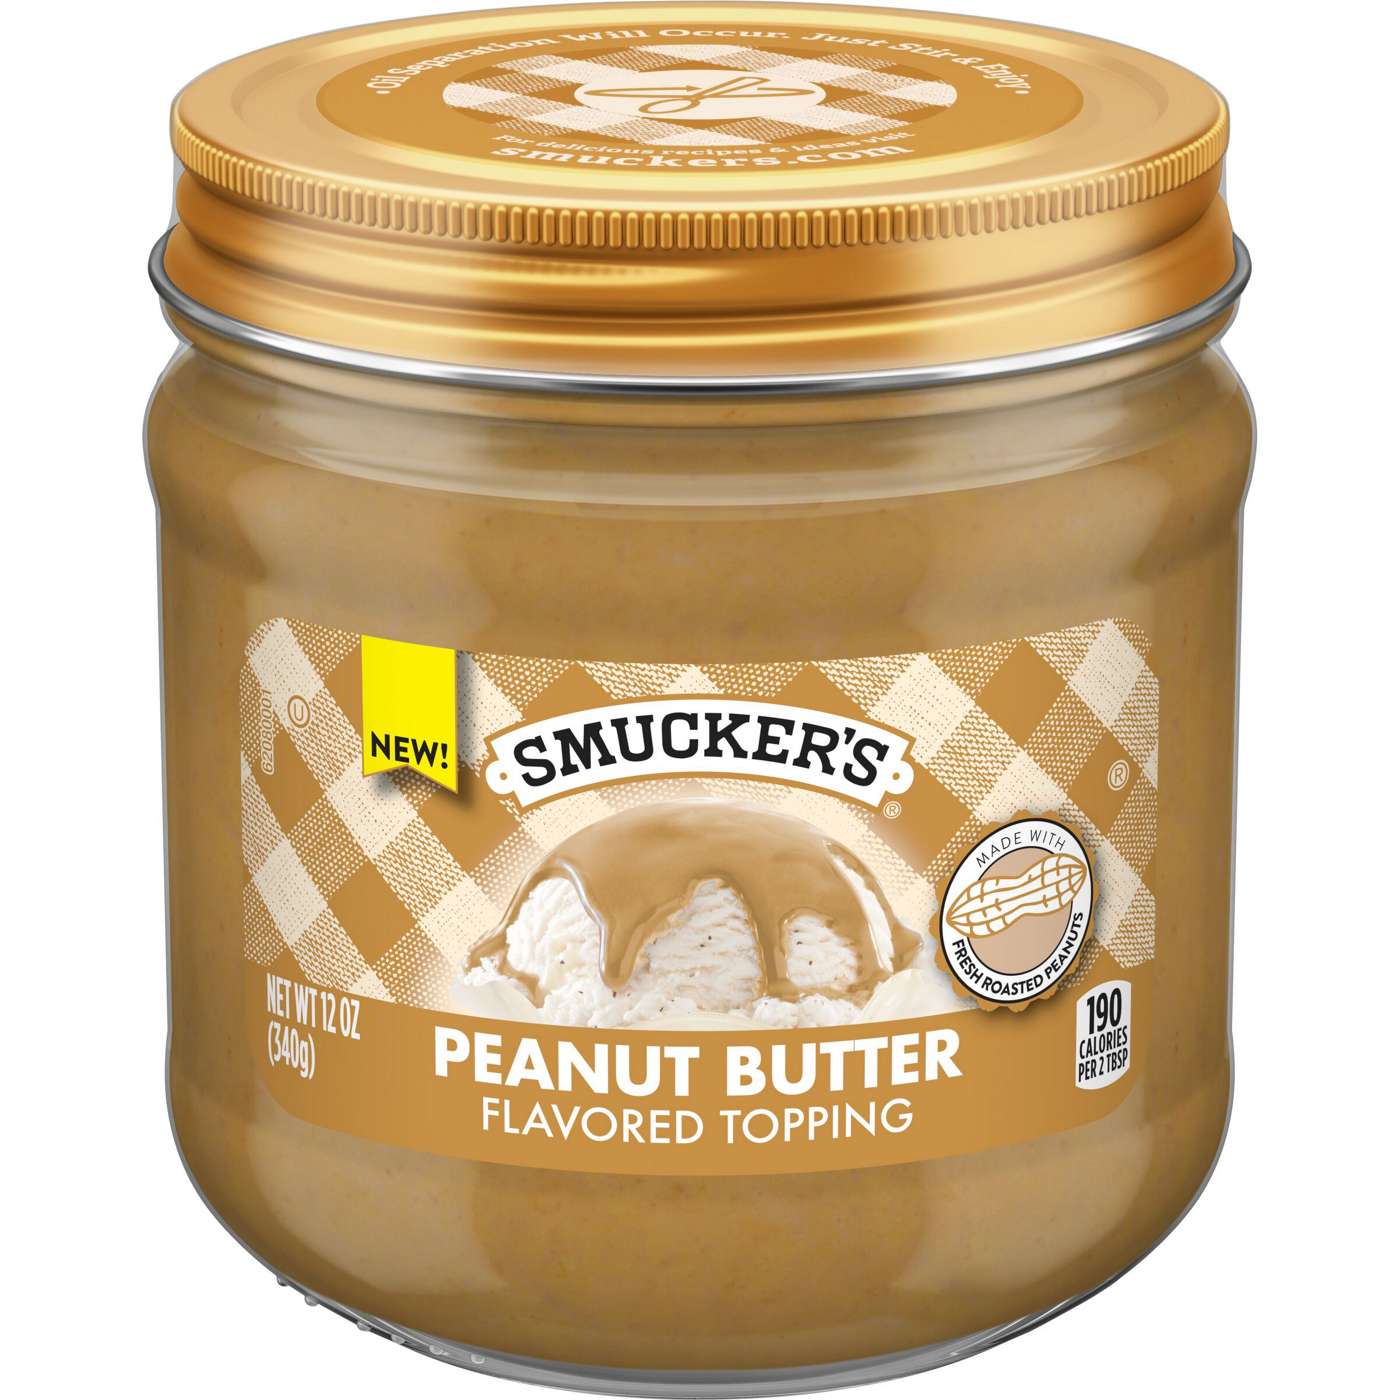 Smucker's Peanut Butter Topping; image 1 of 3